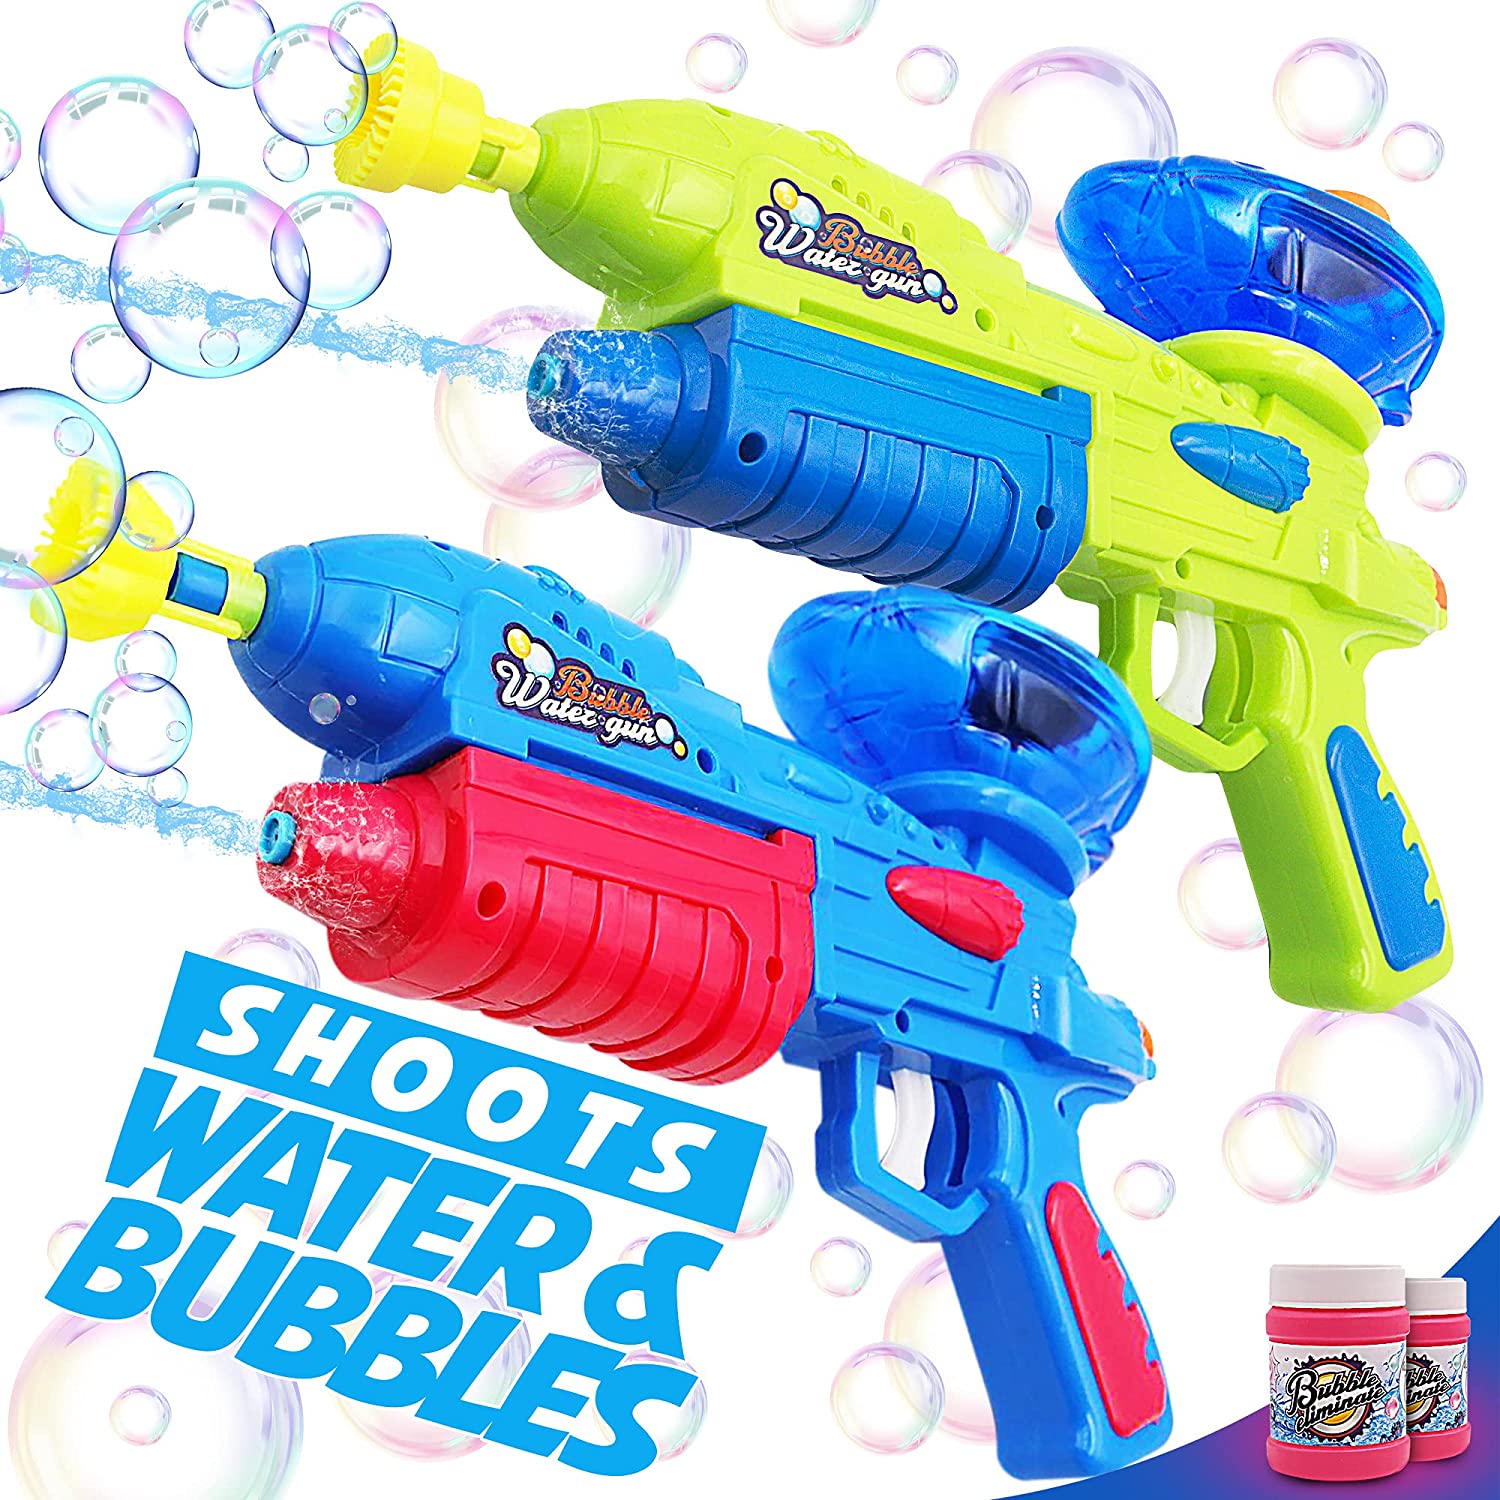 (2 Pack) Bubble Gun & Water Gun for Kids, Boys, Girls – Water & Bubble Maker, Blaster & Blower Machine for Outdoor Activities Camping Pool Party – Soaker Squirt Gun Toys Gift for Age 4, 5, 6, 7, 8, 9… 